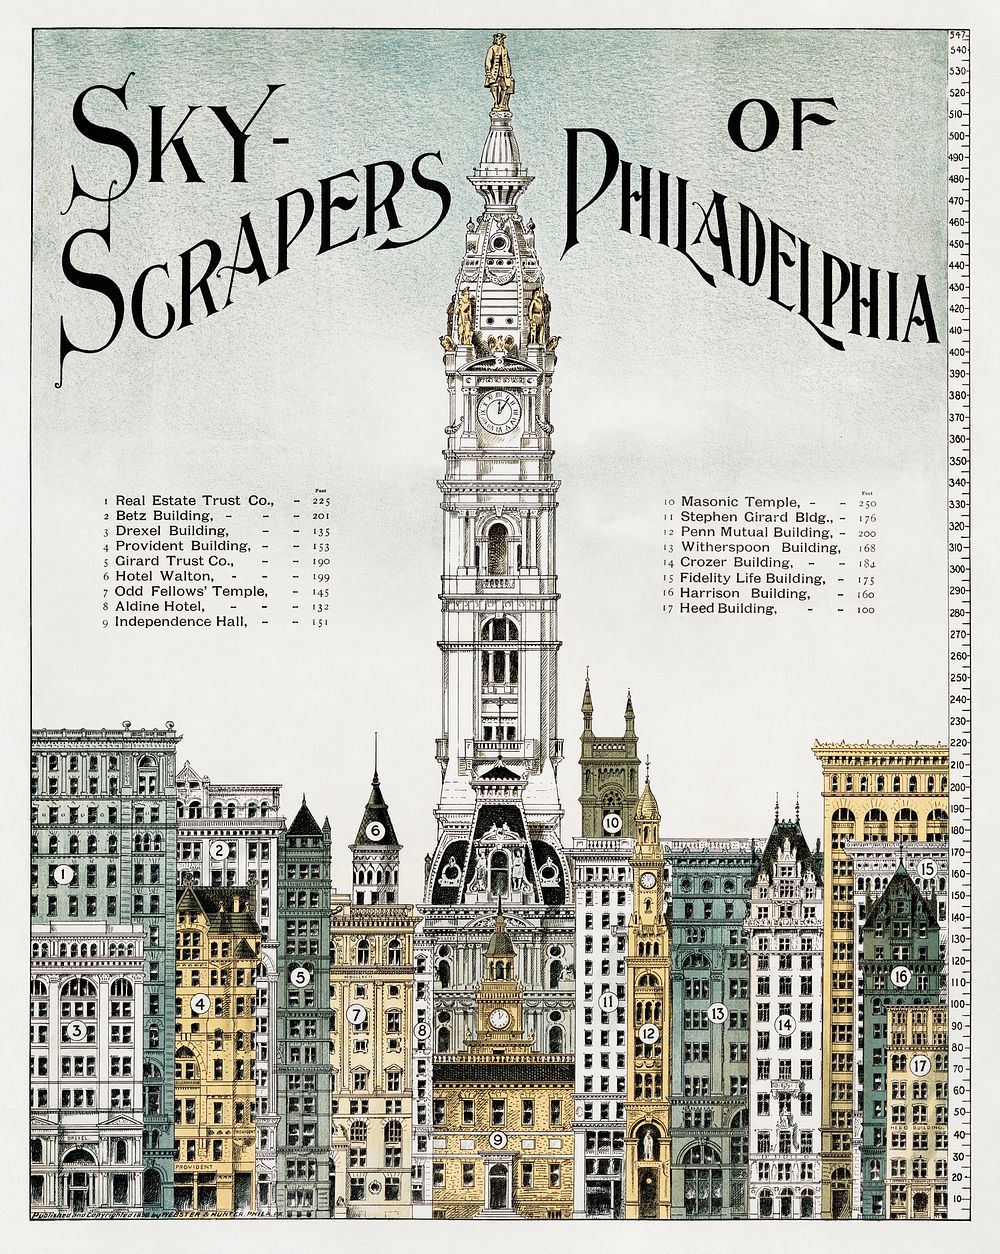 Sky-scrapers of Philadelphia, aesthetic printing. Original public domain image from the Library of Congress. Digitally…